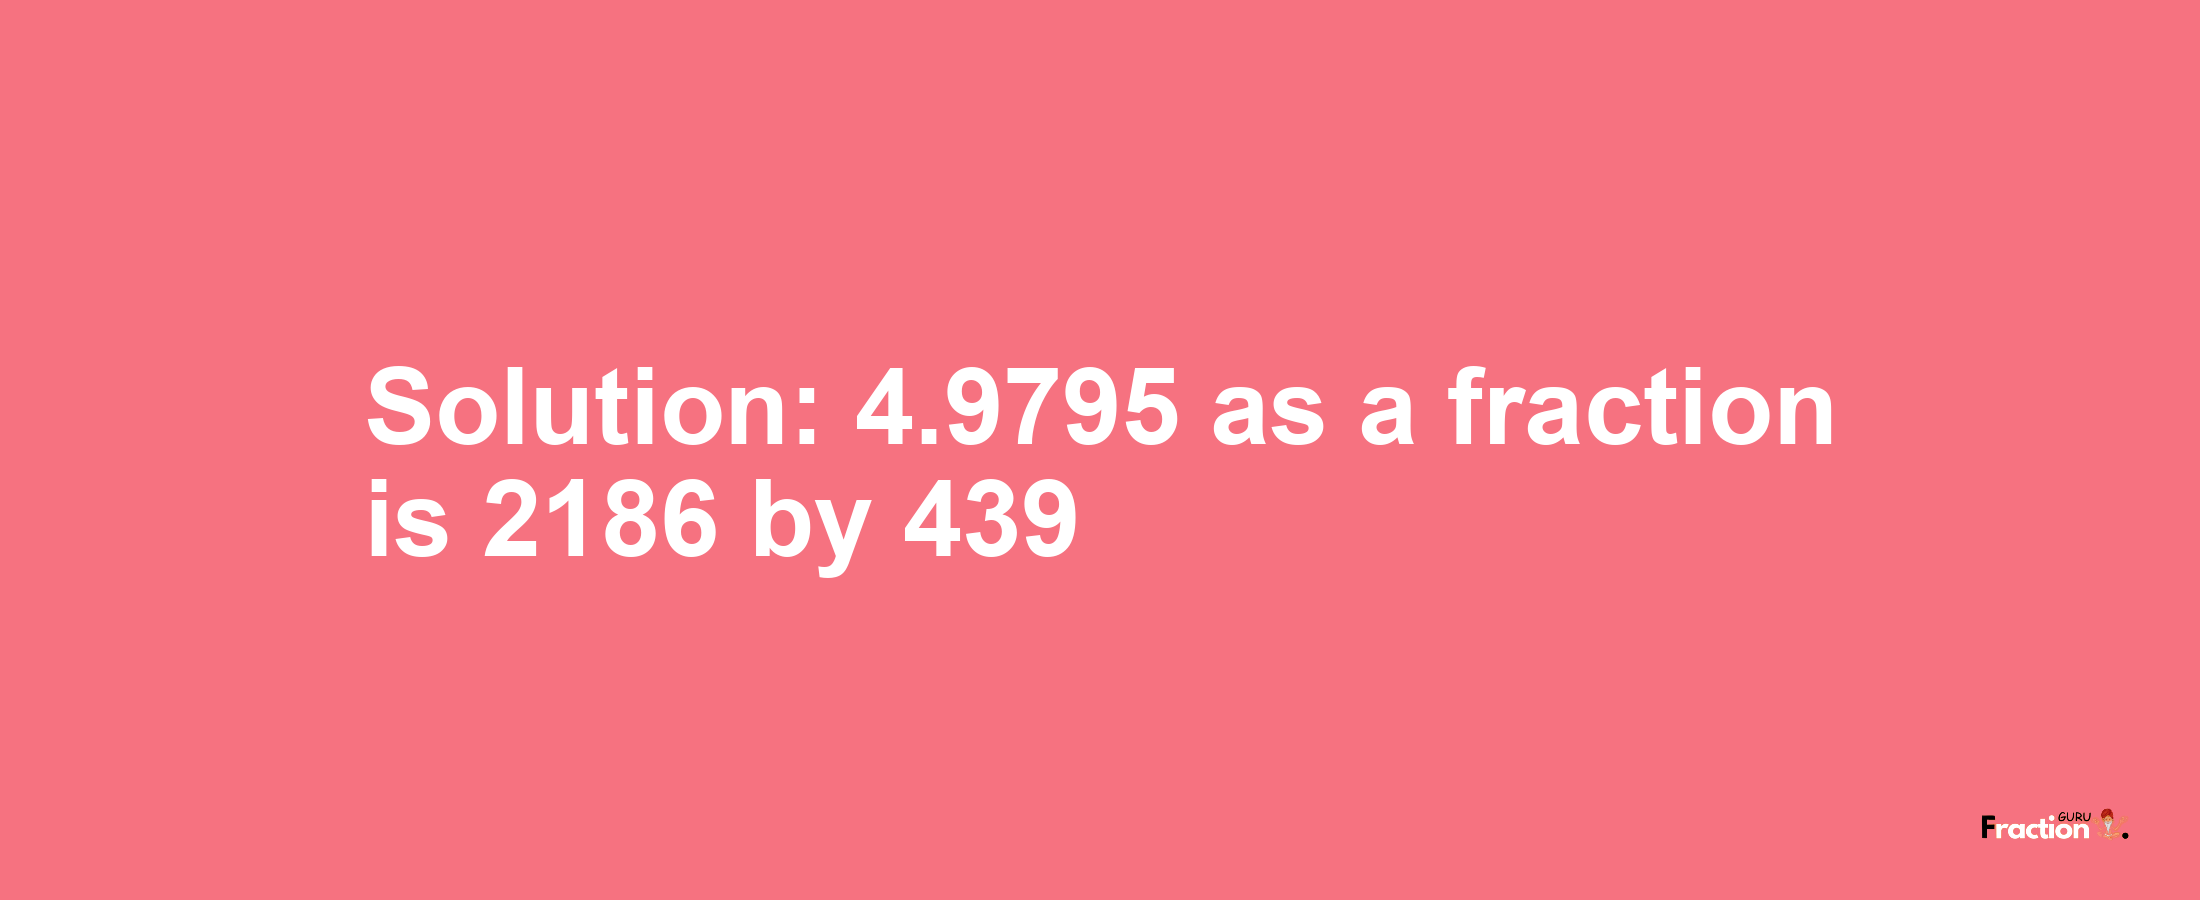 Solution:4.9795 as a fraction is 2186/439